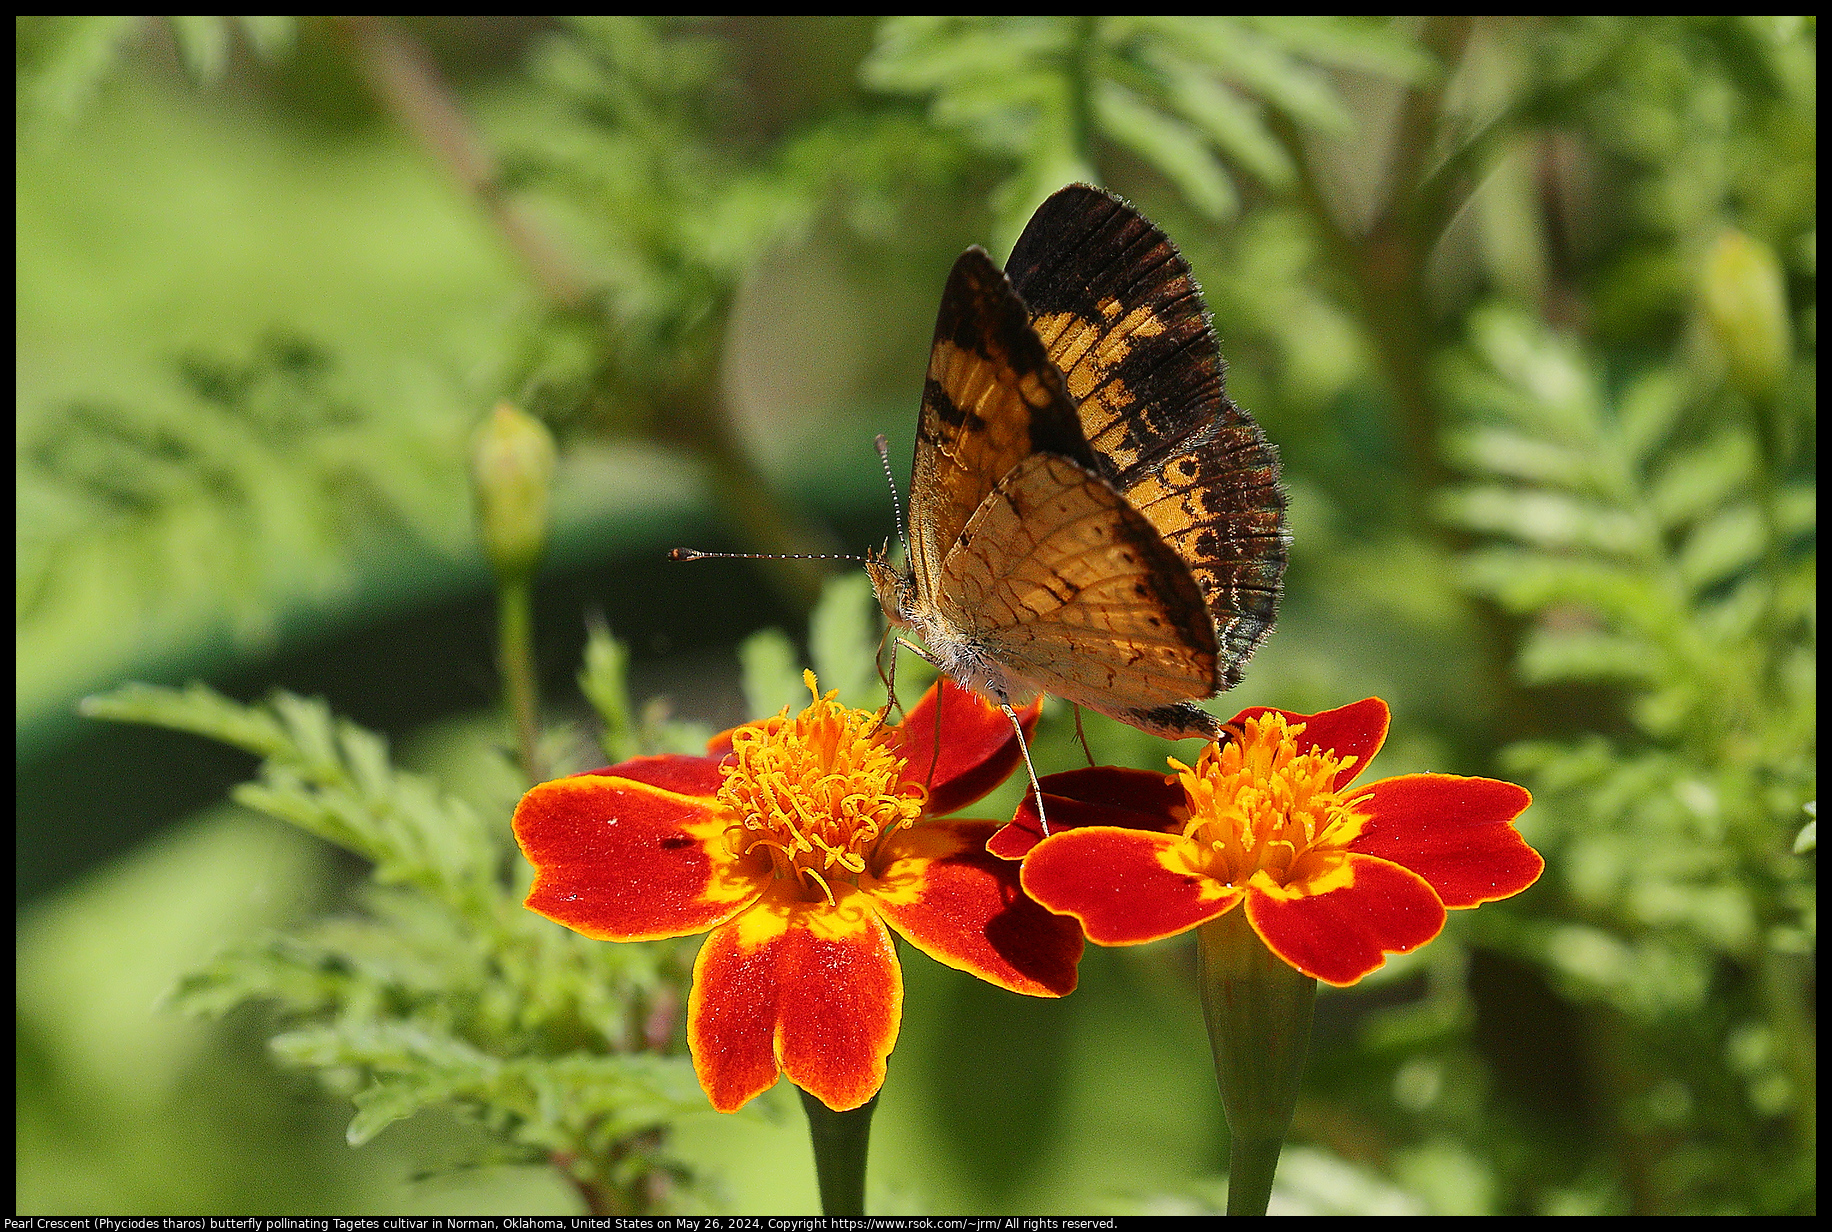 Pearl Crescent (Phyciodes tharos) butterfly pollinating Tagetes cultivar in Norman, Oklahoma, United States on May 26, 2024